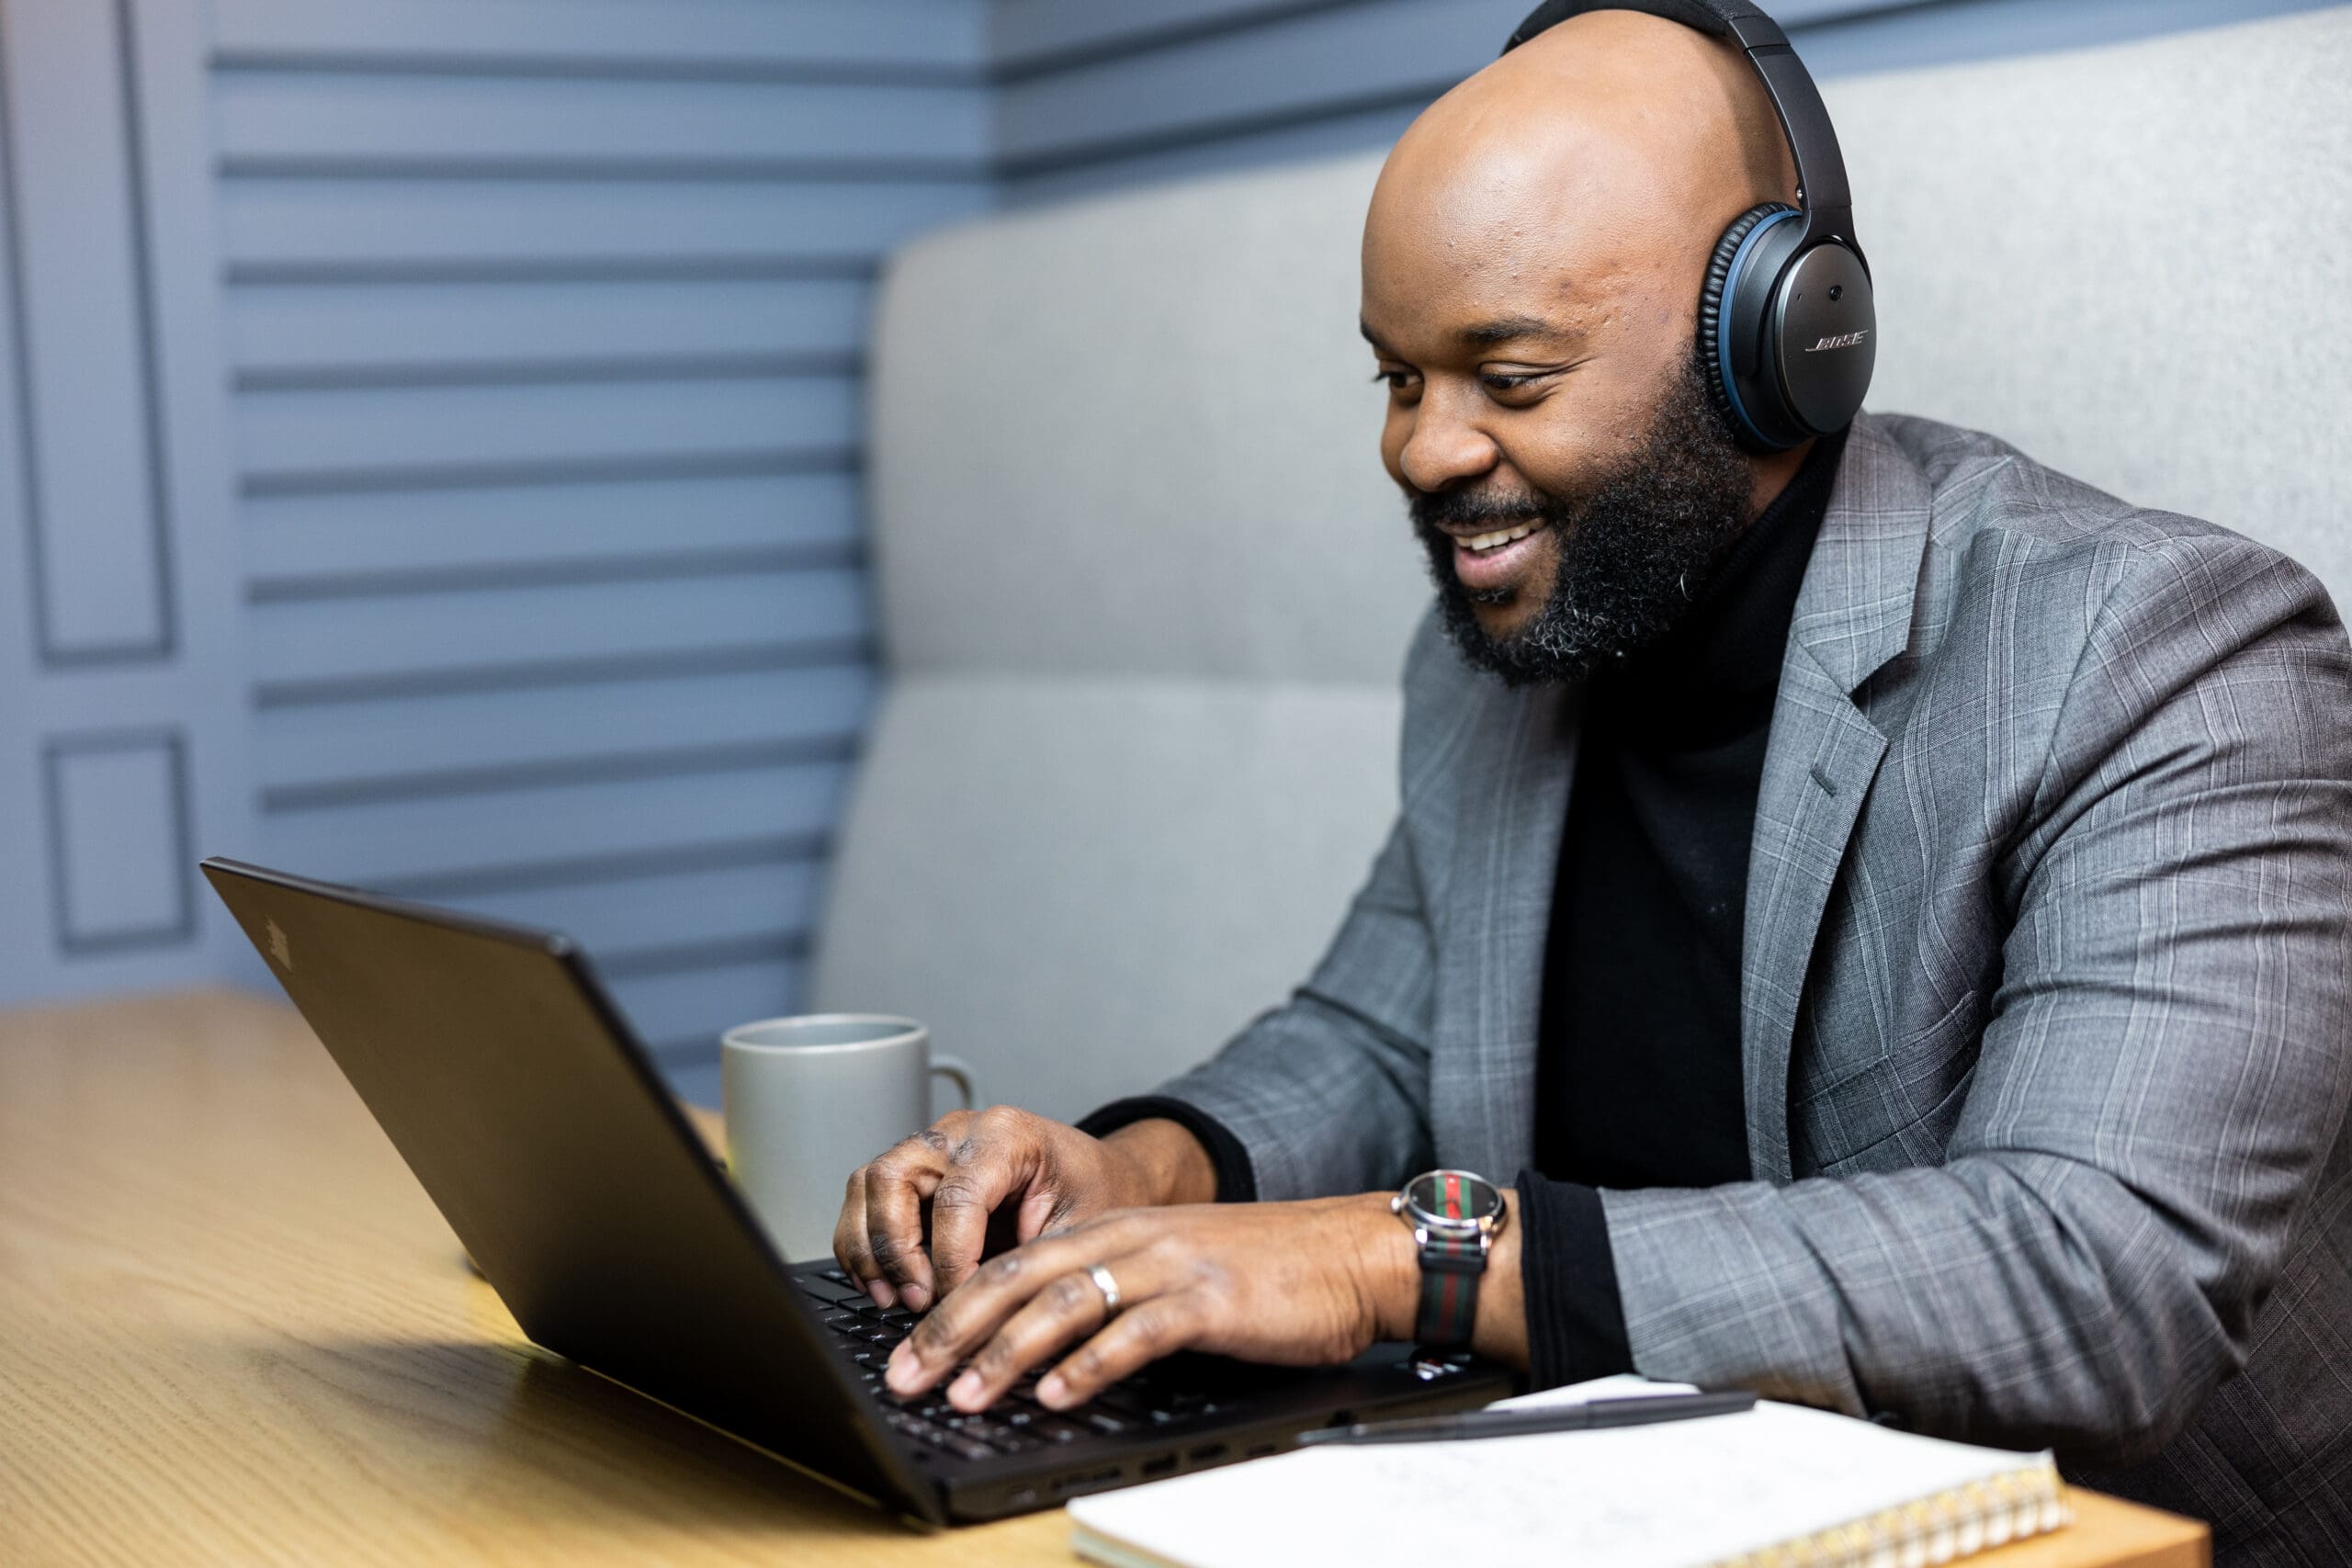 Man with headphones on on a laptop